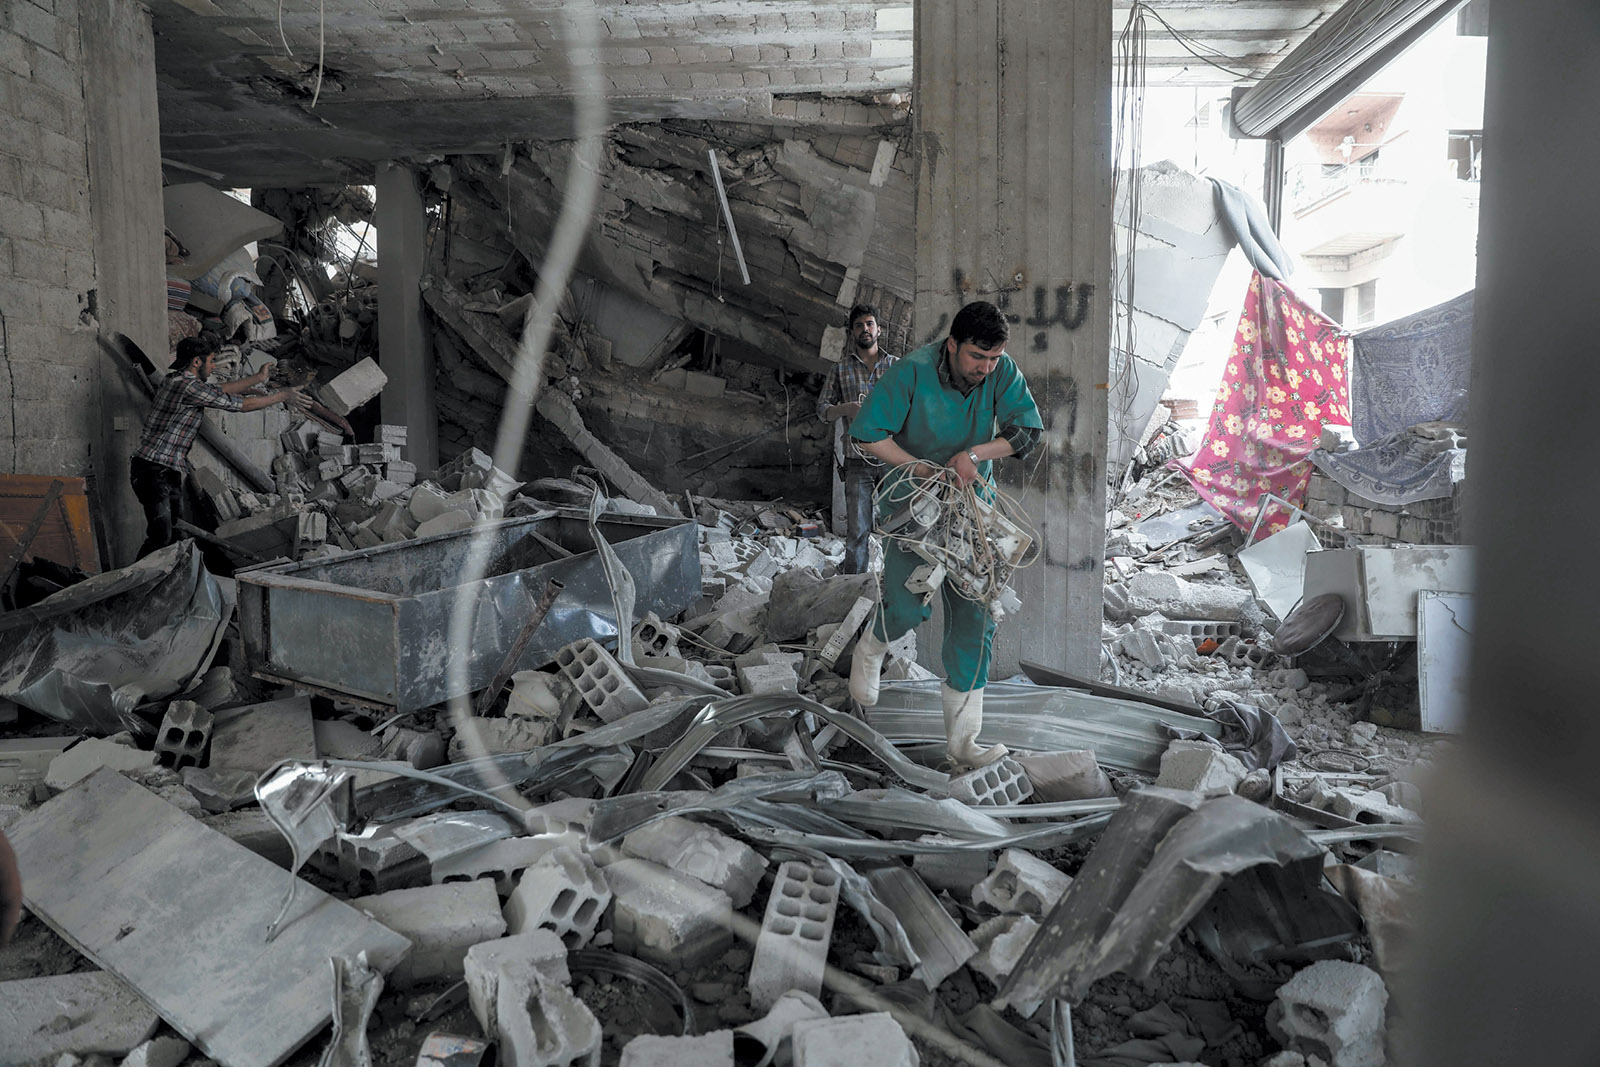 Men inspecting a hospital damaged by an air strike in Eastern Ghouta, Syria